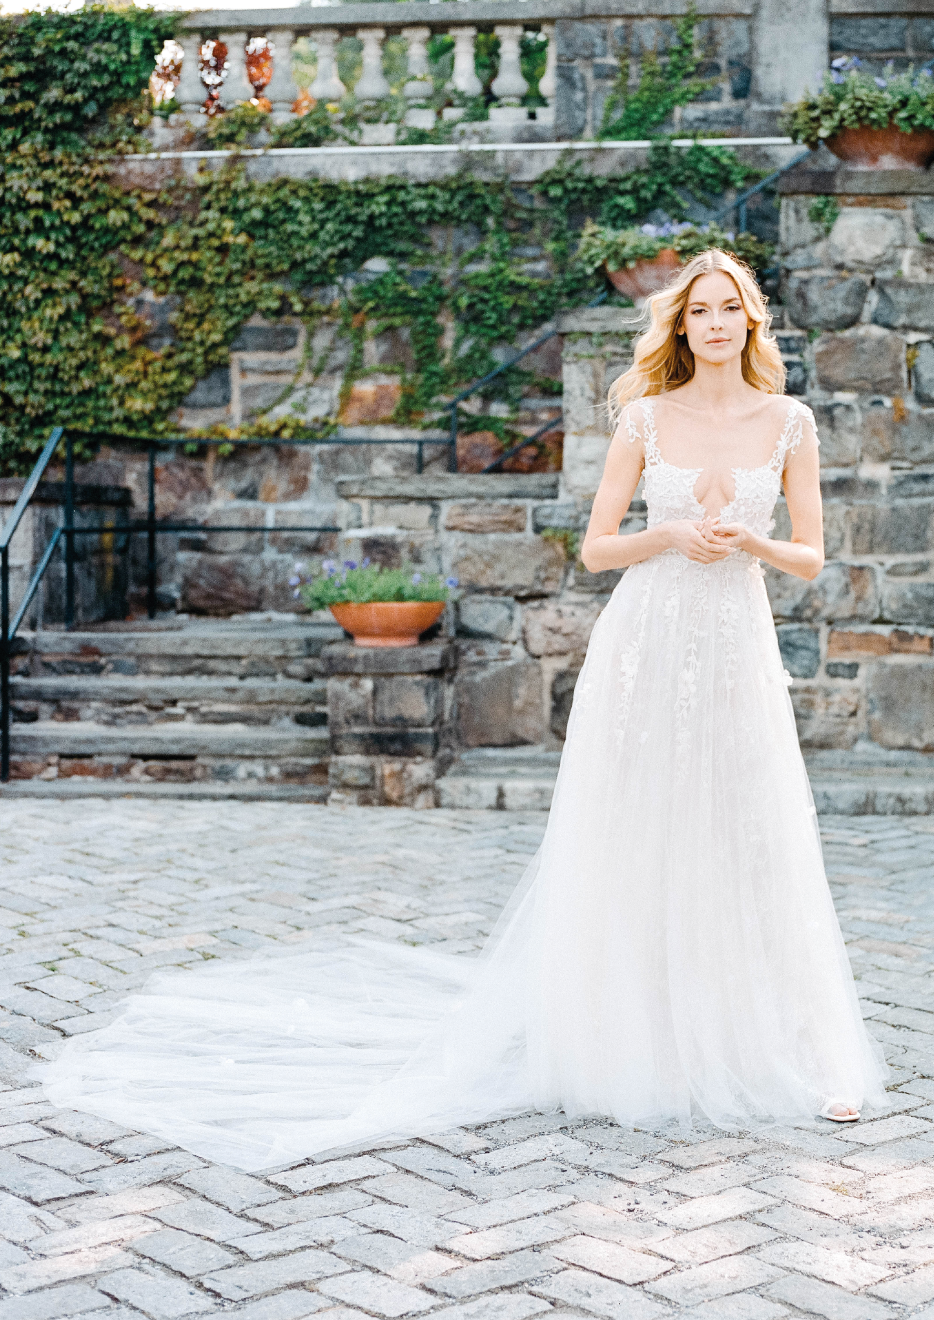 Wedding dress model Elizabeth - Cap sleeve low scooped neckline gown with low illusion back and cathedral train - Verdin New York